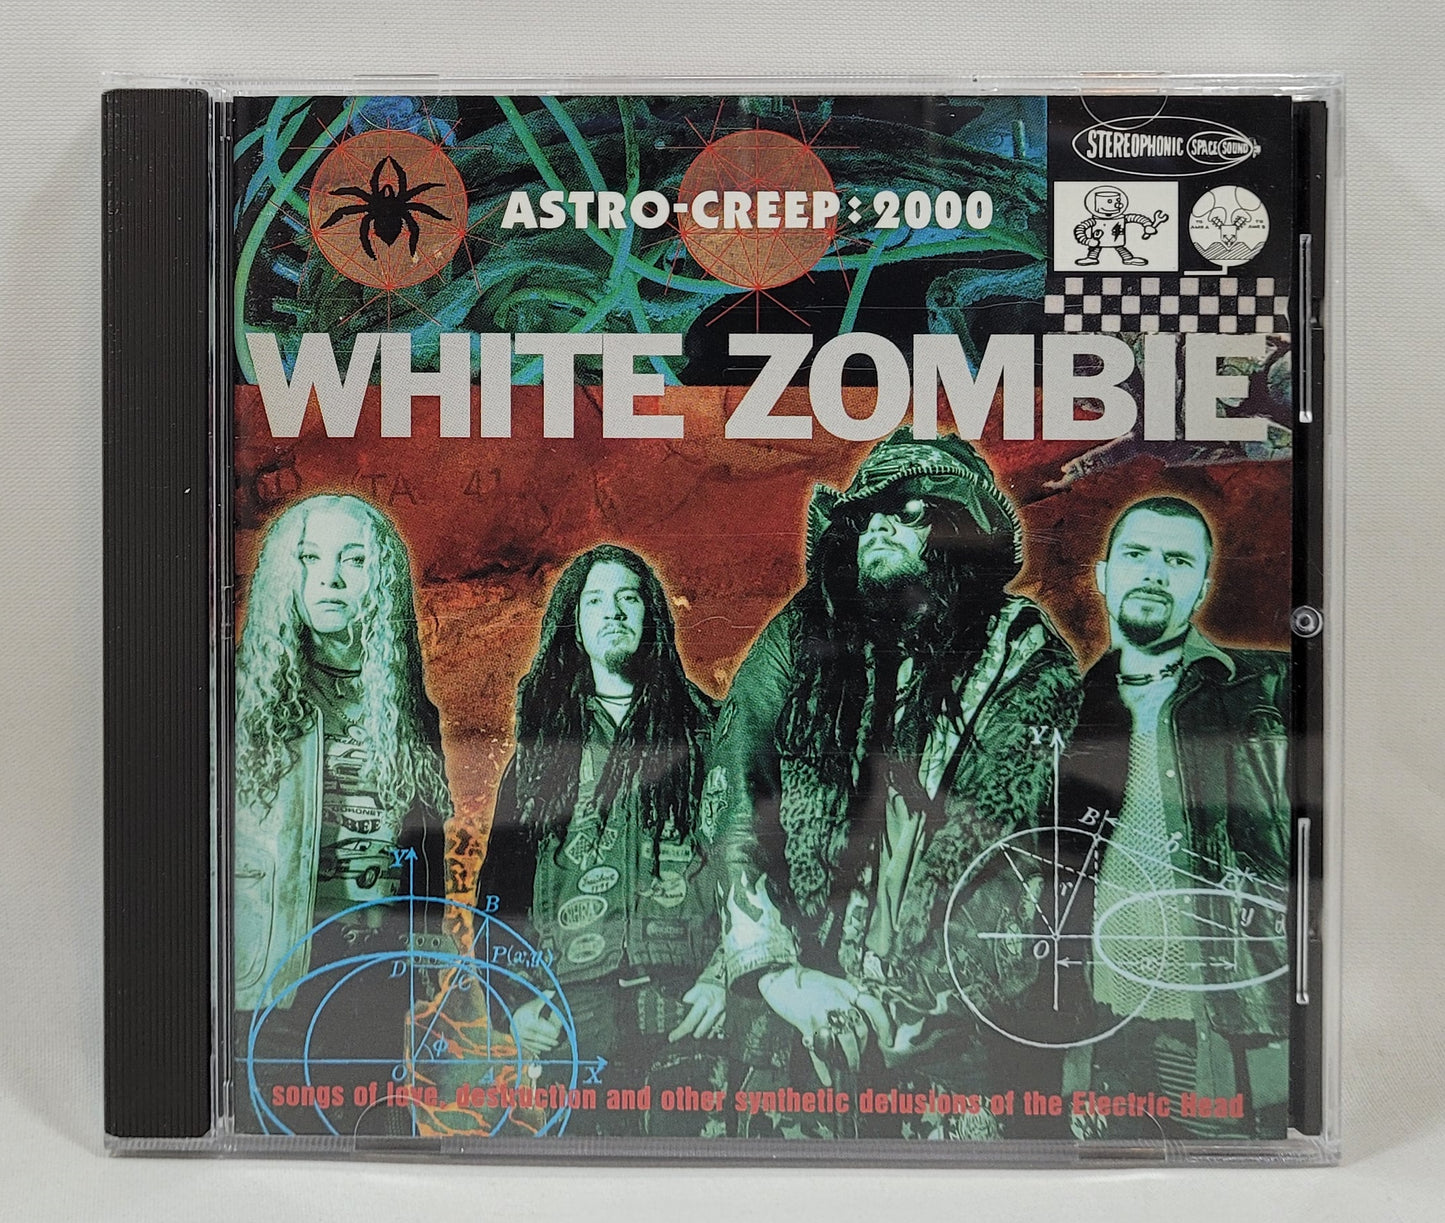 White Zombie - Astro-Creep: 2000 (Songs Of Love, Destruction And Other Synthetic Delusions Of The Electric Head) [1995 Used CD]